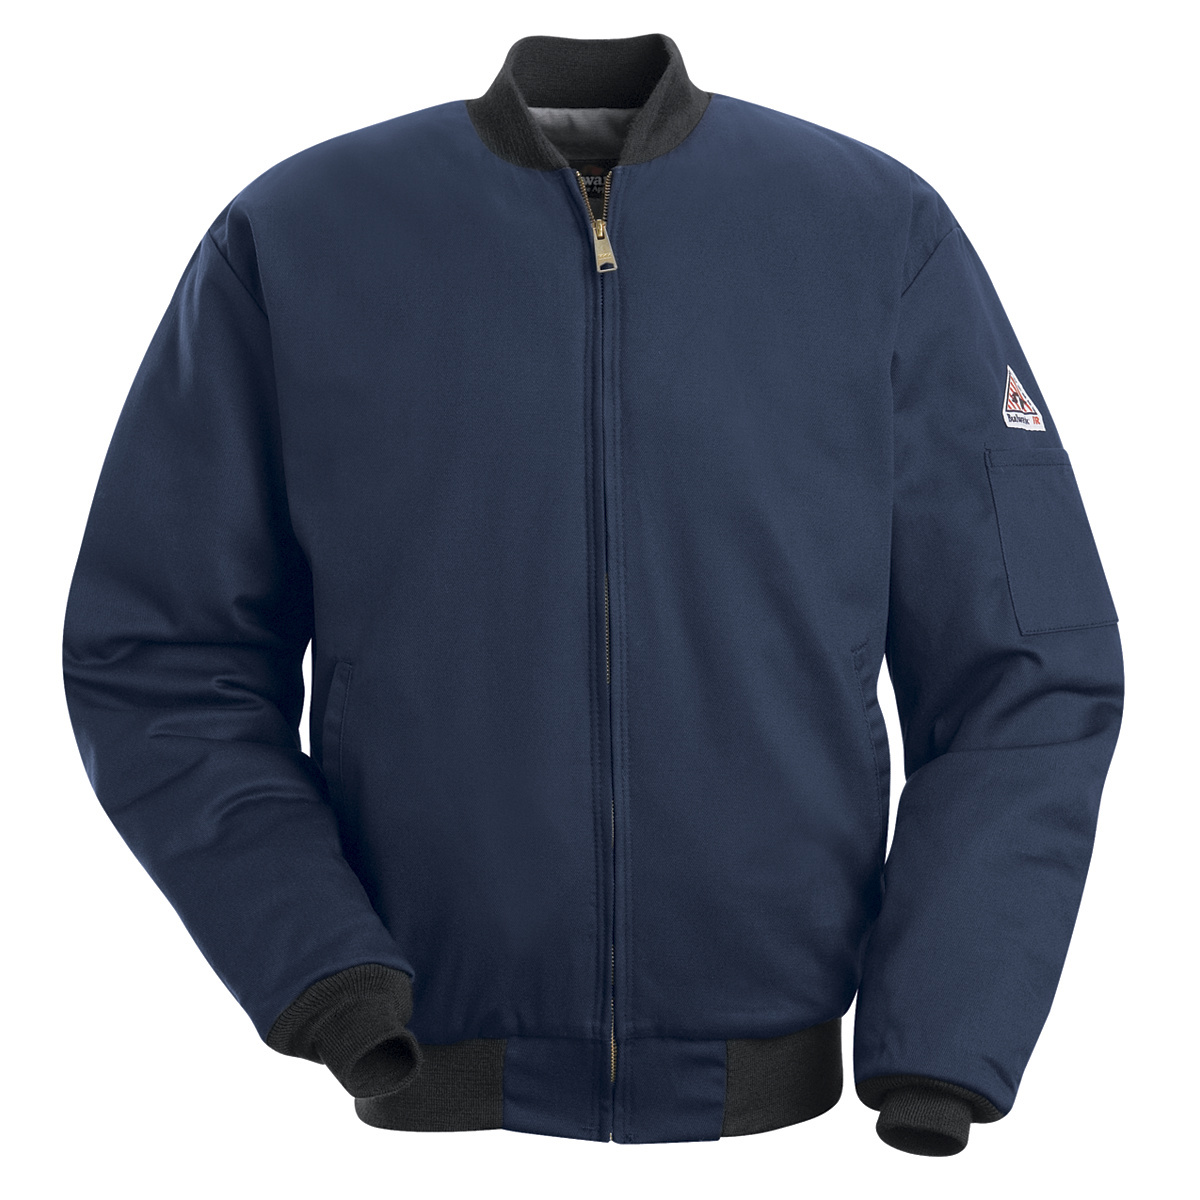 Bulwark® Medium Regular Navy Blue EXCEL FR® Twill Cotton Water Repellent Flame Resistant Jacket With Cotton Lining And Zipper Fr